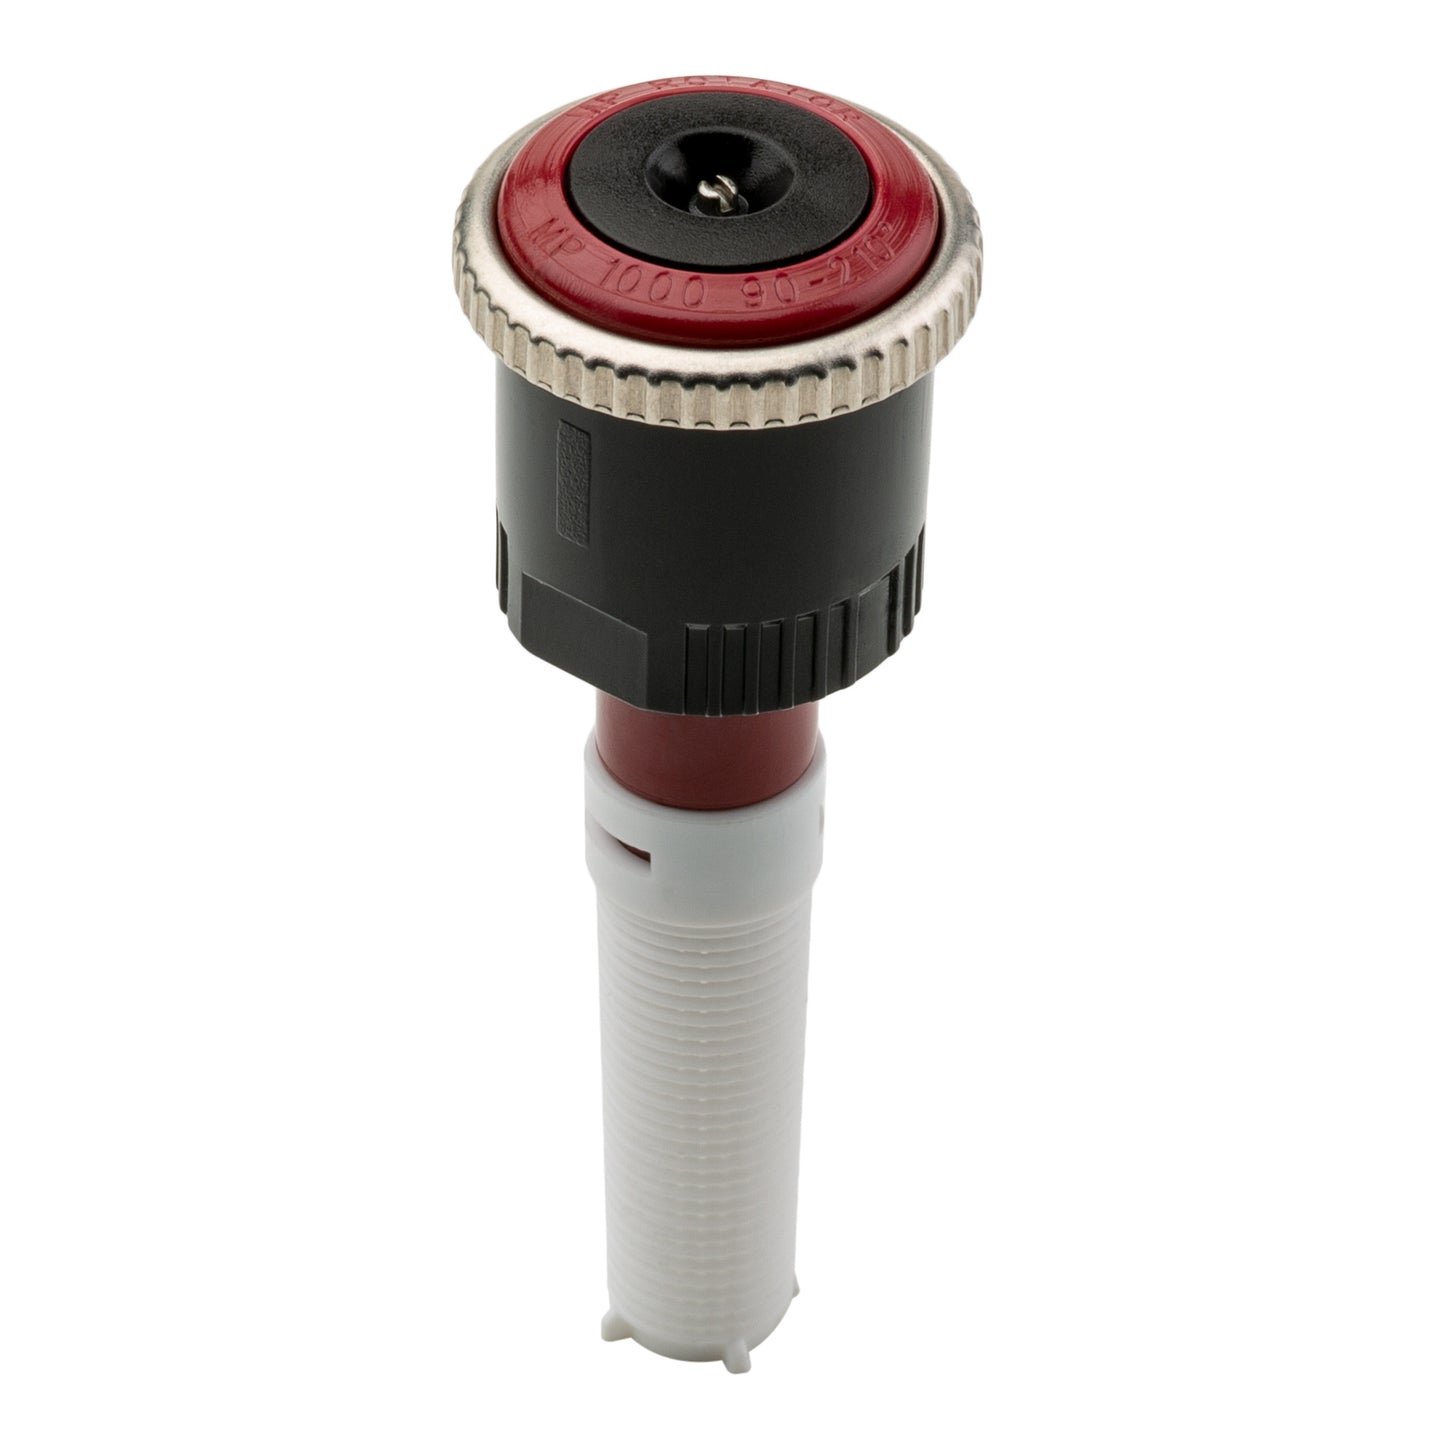 MP1000-90 - MP Rotator Nozzle, 8' to 15', Adjustable from 90 to 210 Degrees